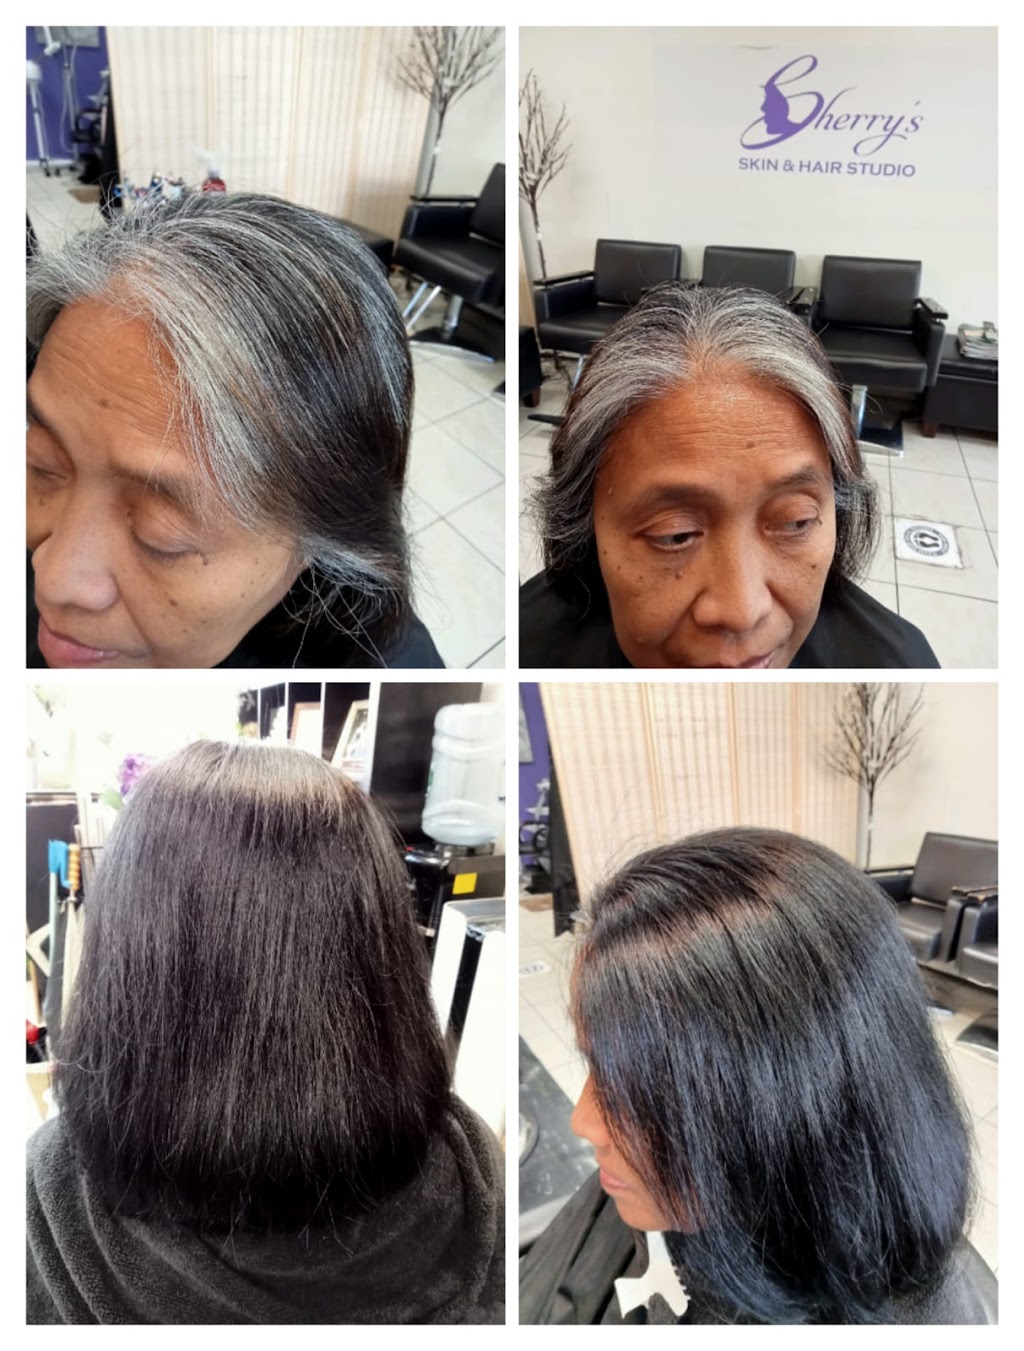 Sherrys Skin & Hair Studio | 183-16 Horace Harding Expy, Queens, NY 11365 | Phone: (347) 440-2497